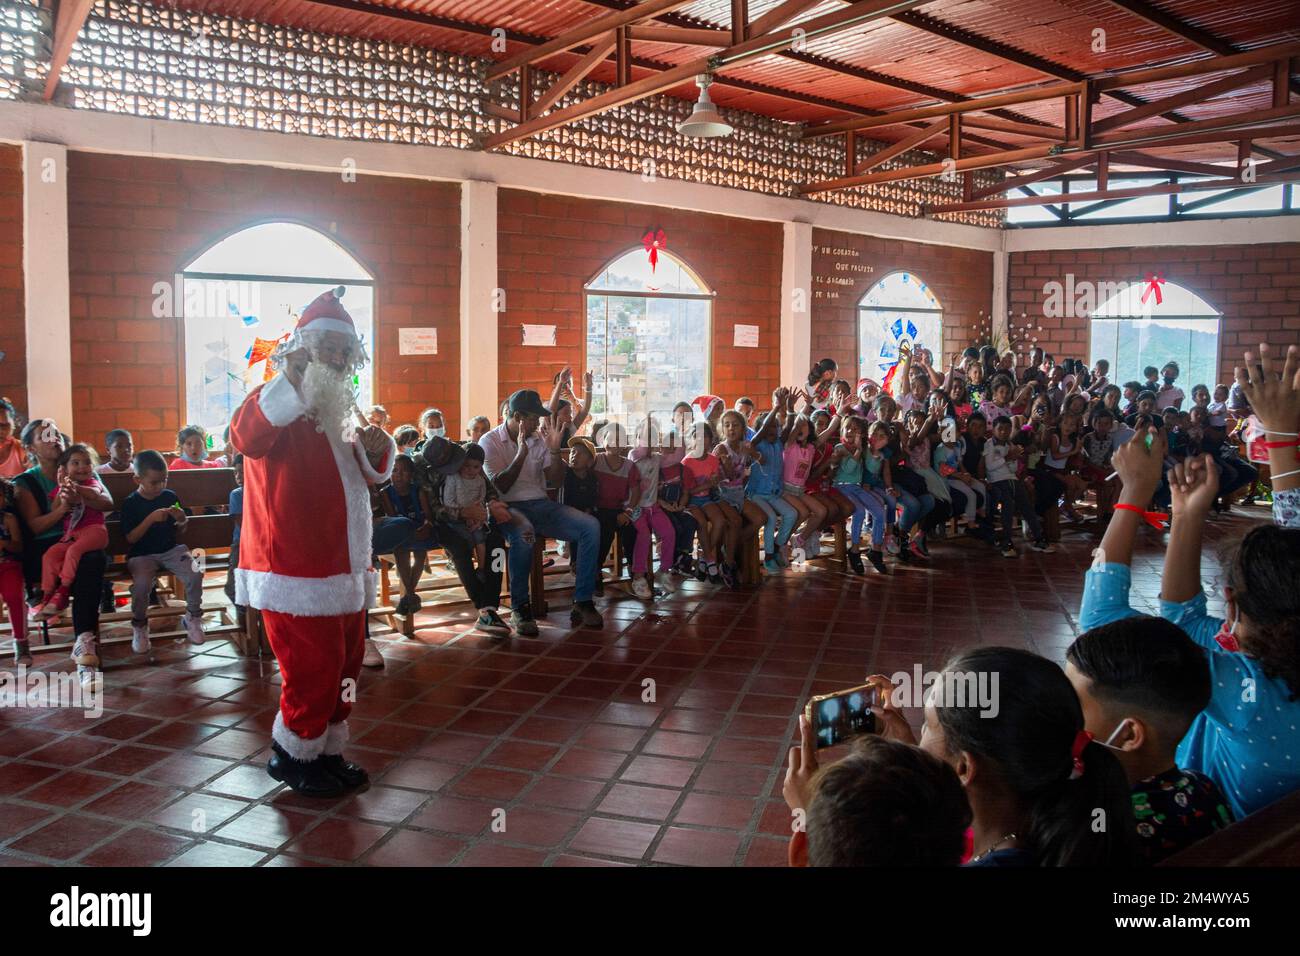 Santa in the streets (Santa en las calles), after 2 years of not being able to celebrate this solidarity project that provides moments of happiness to Stock Photo